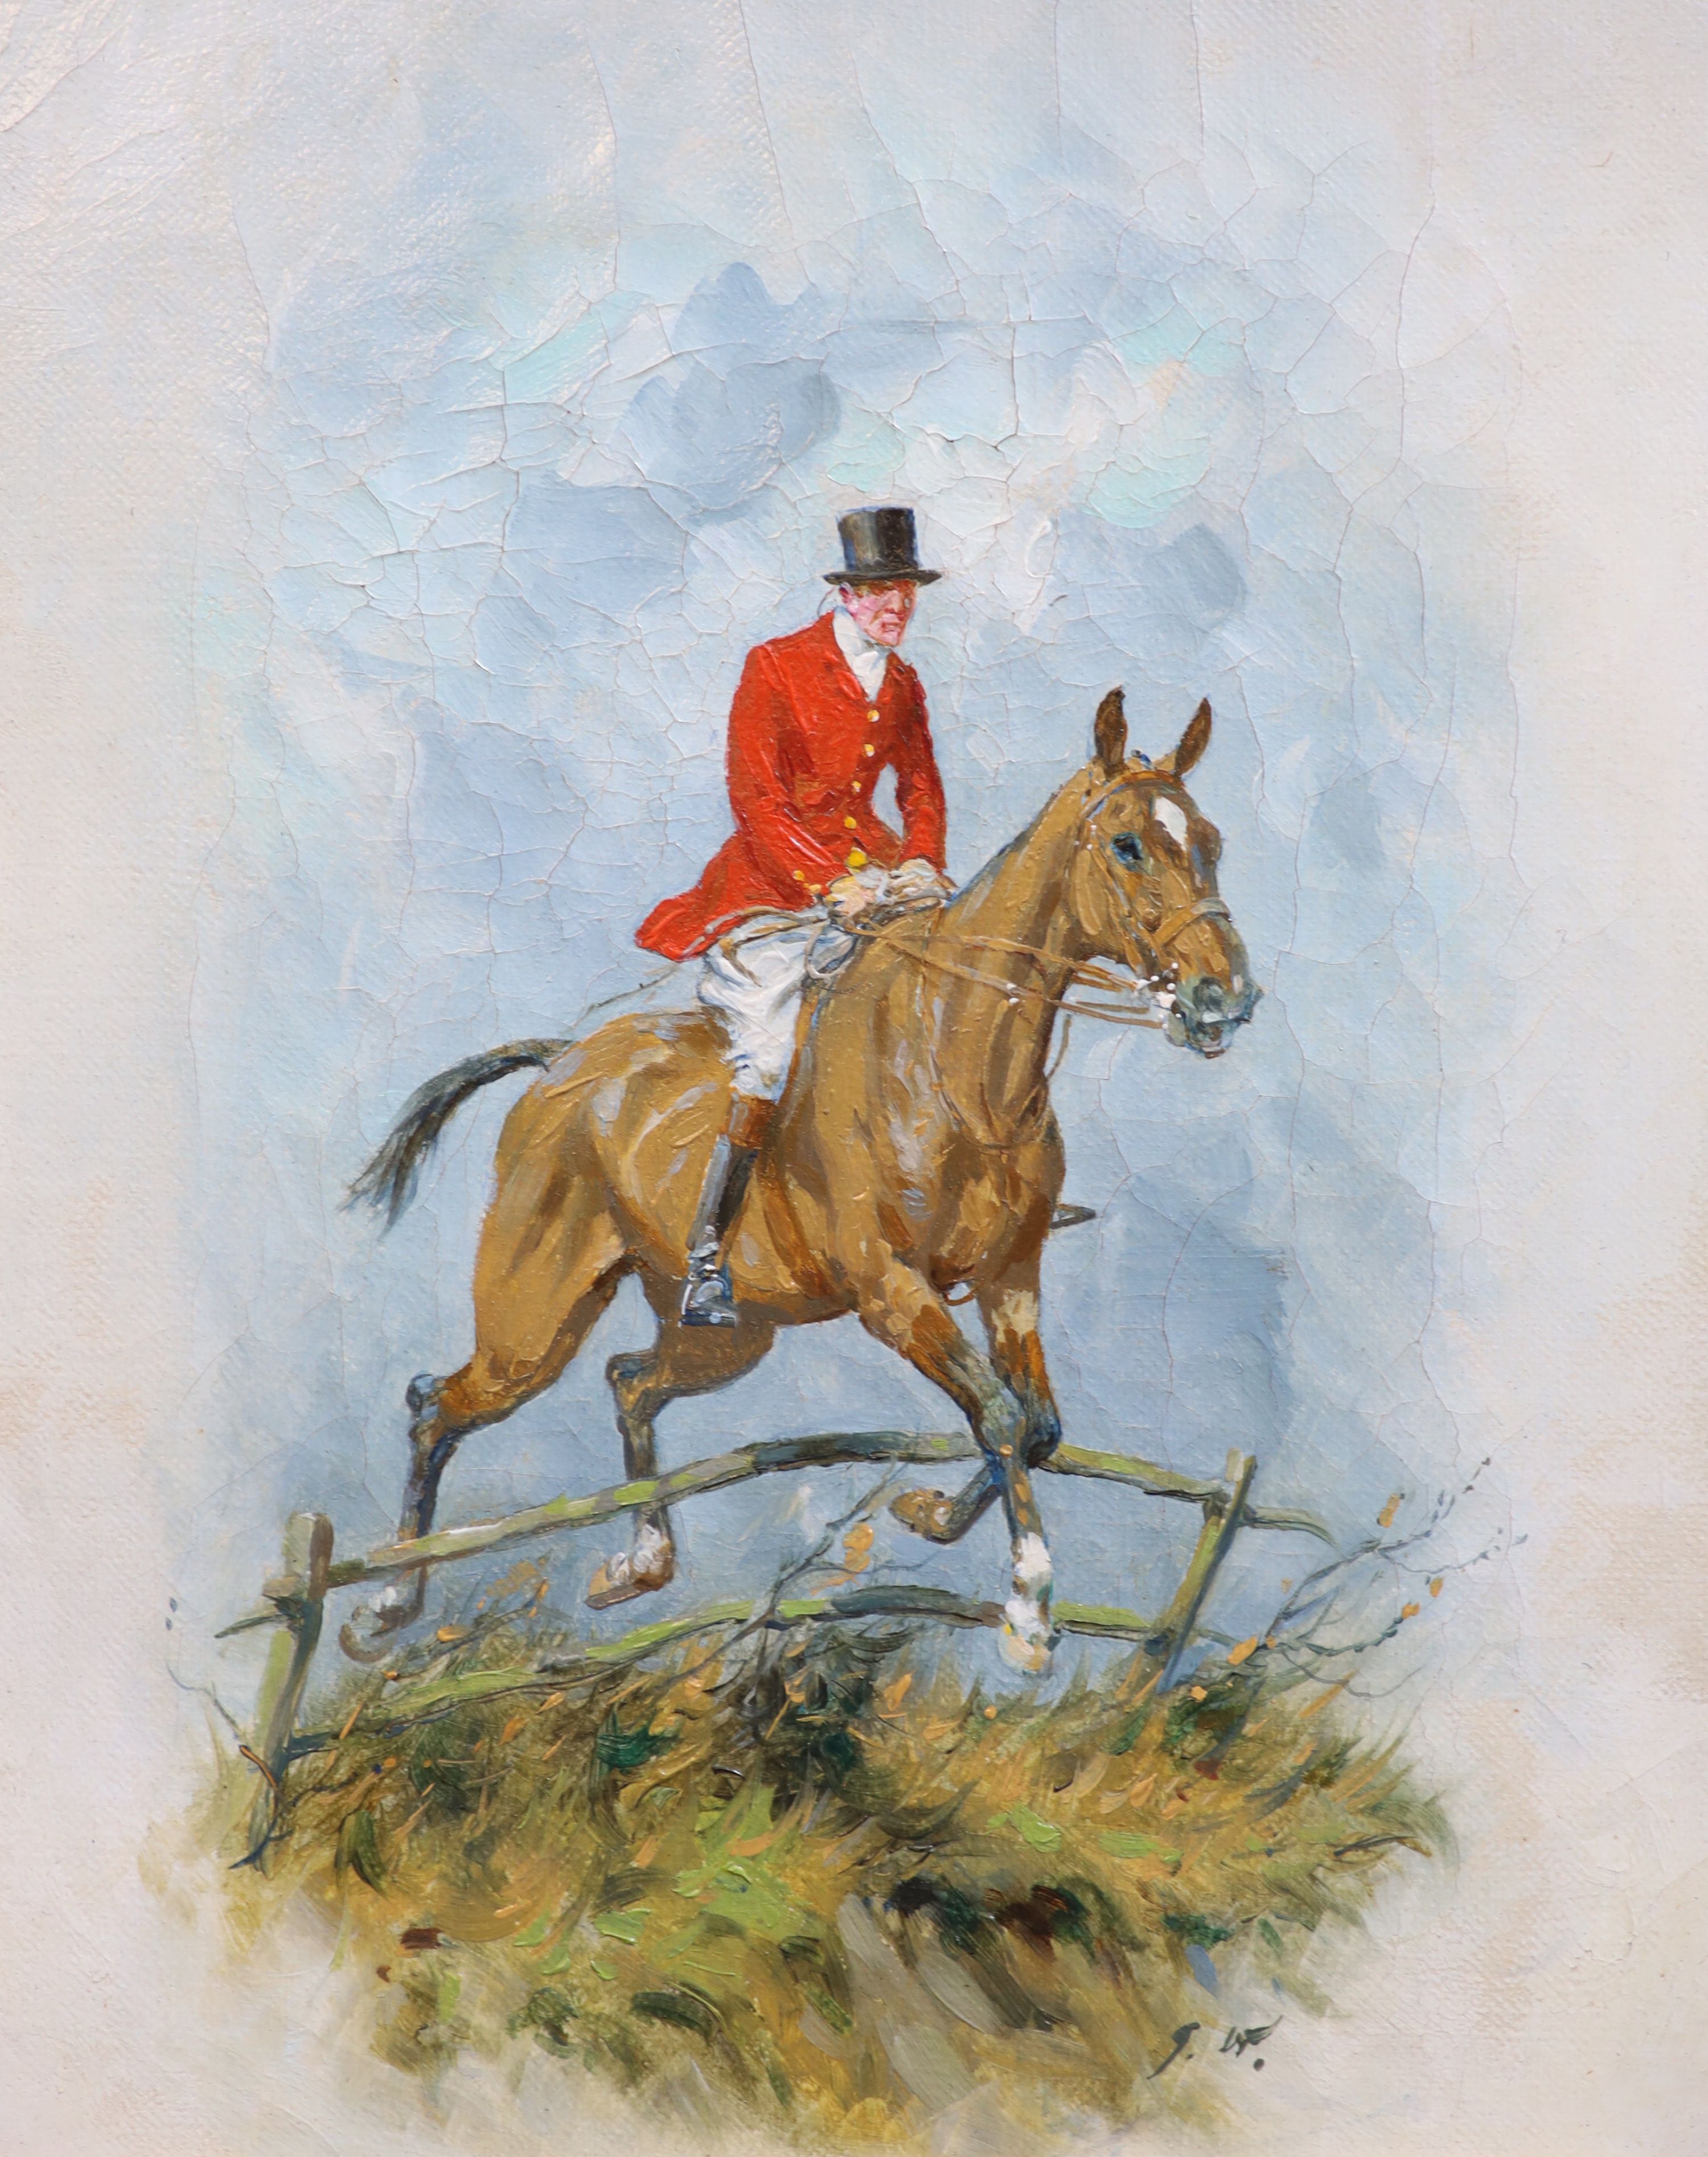 George Wright (1860-1942), Horse and huntsman taking a fence, Oil on canvas, 25.5 x 20 cm.